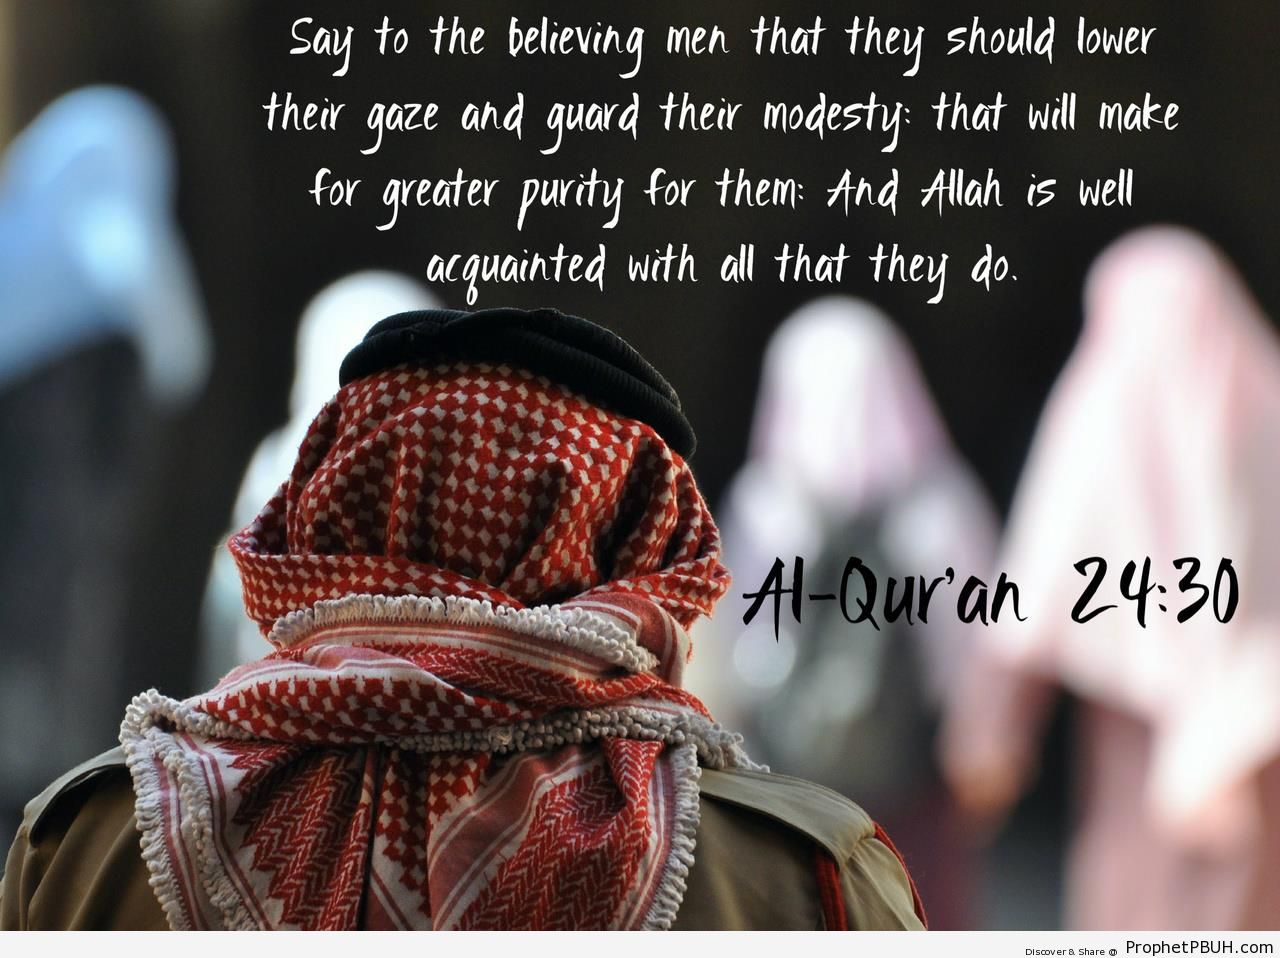 Surat an-Nur - Quran 24-30 - Islamic Quotes About Modesty and Lowering the Gaze 